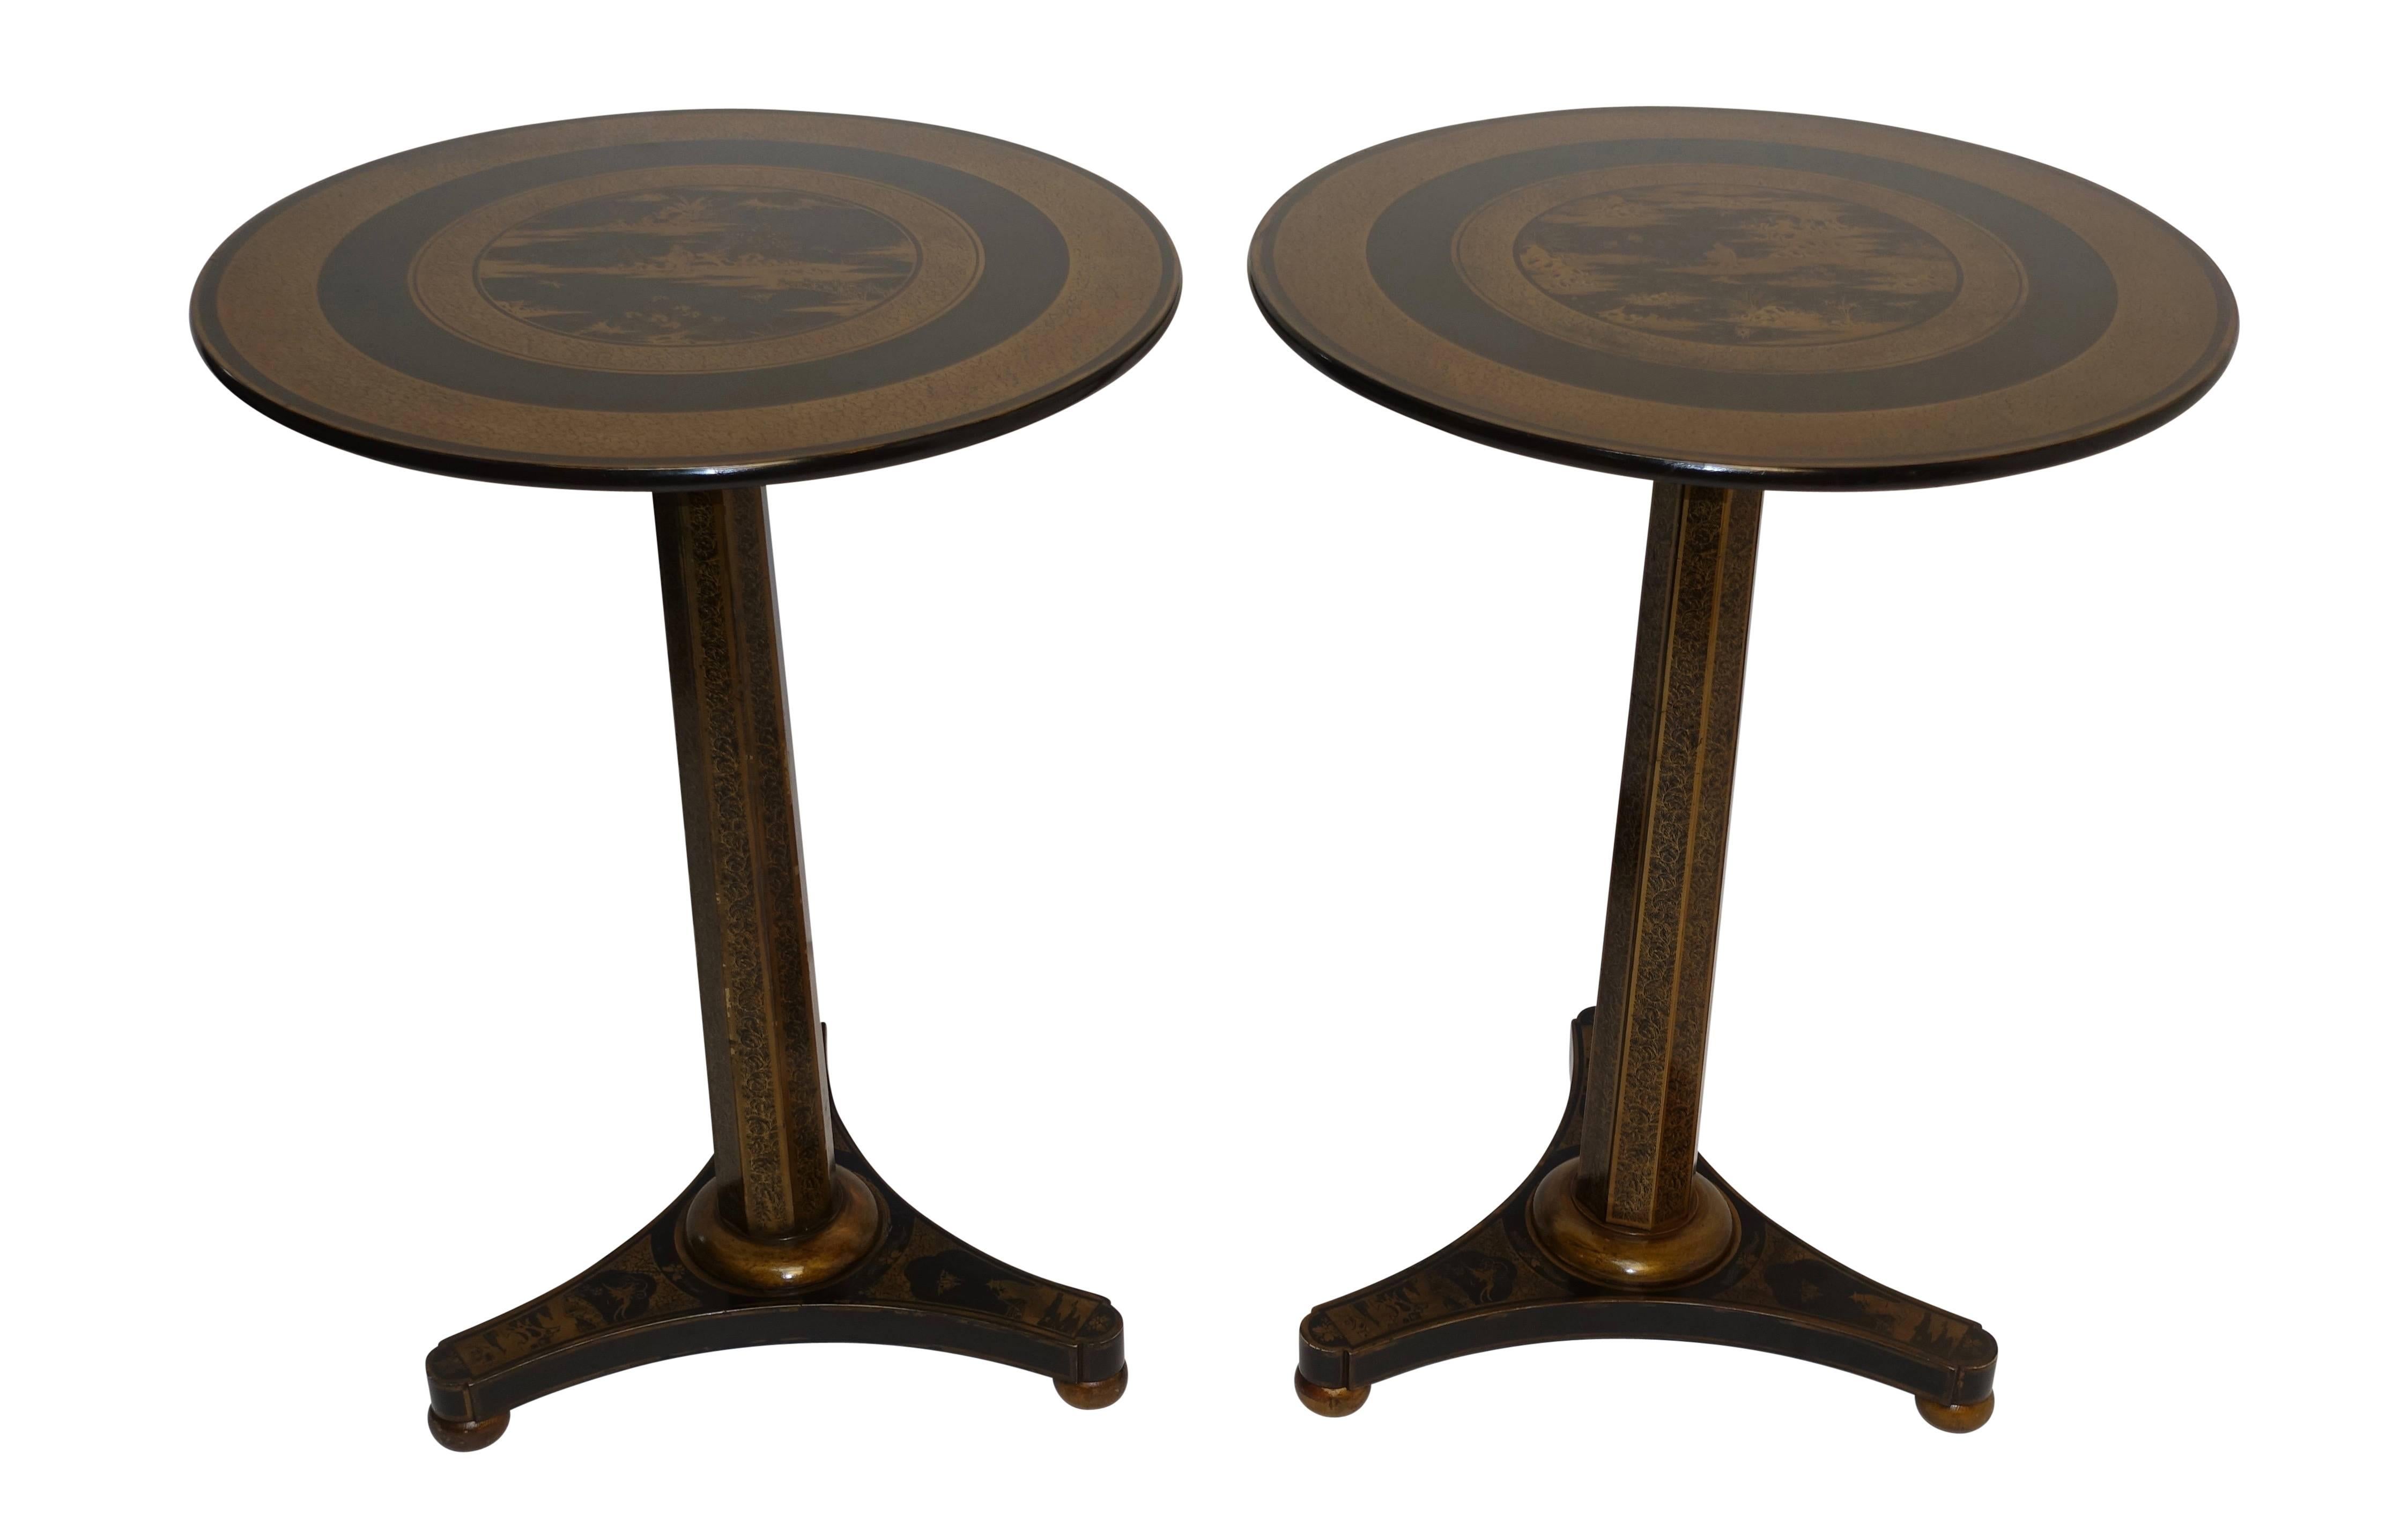 19th Century Regency Black Lacquer Side Tables with Chinoiserie Decoration, circa 1840, Pair